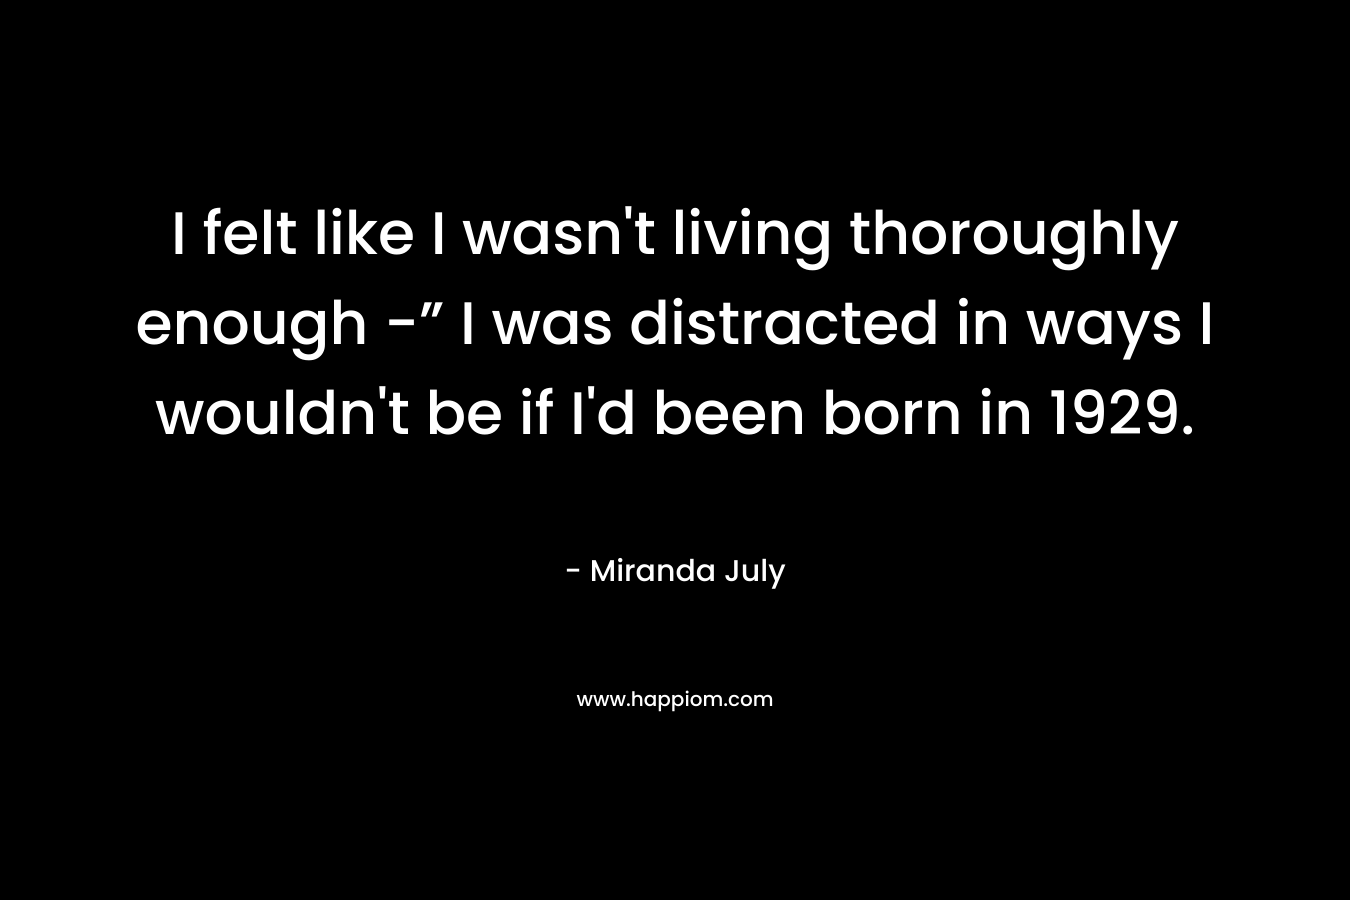 I felt like I wasn't living thoroughly enough -” I was distracted in ways I wouldn't be if I'd been born in 1929.